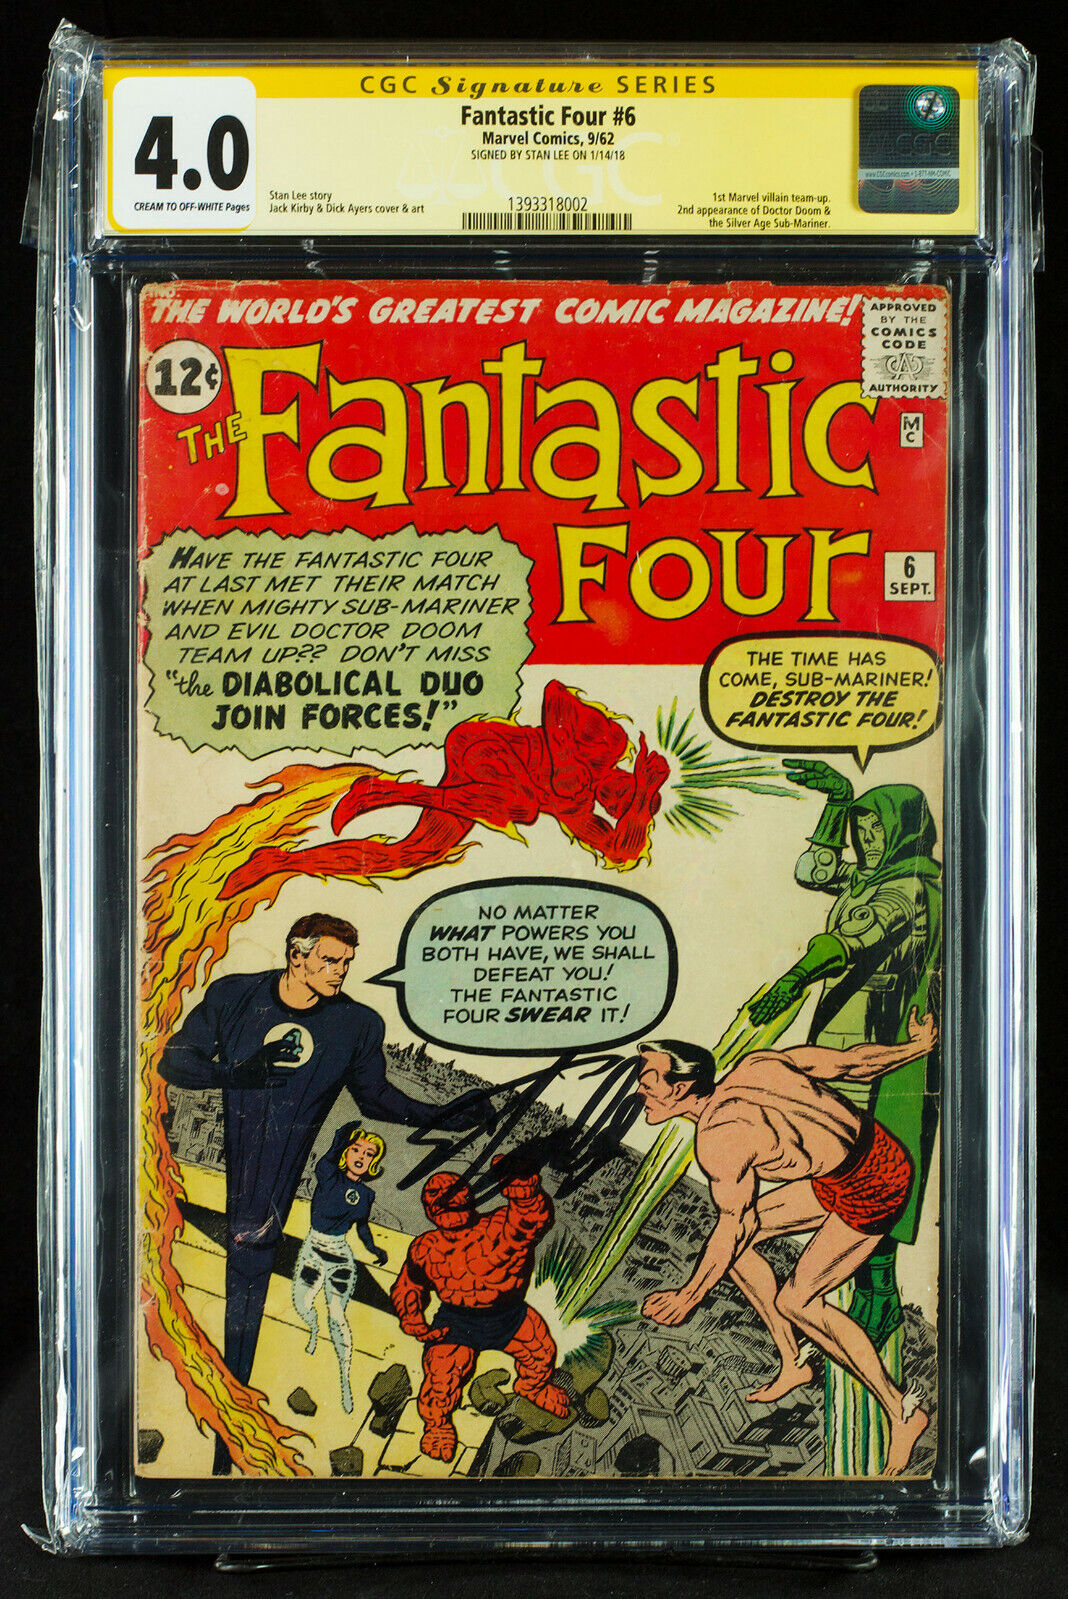 FANTASTIC FOUR #6 CGC 4.0 SS Very Good VG signed by writer STAN LEE super HTF 